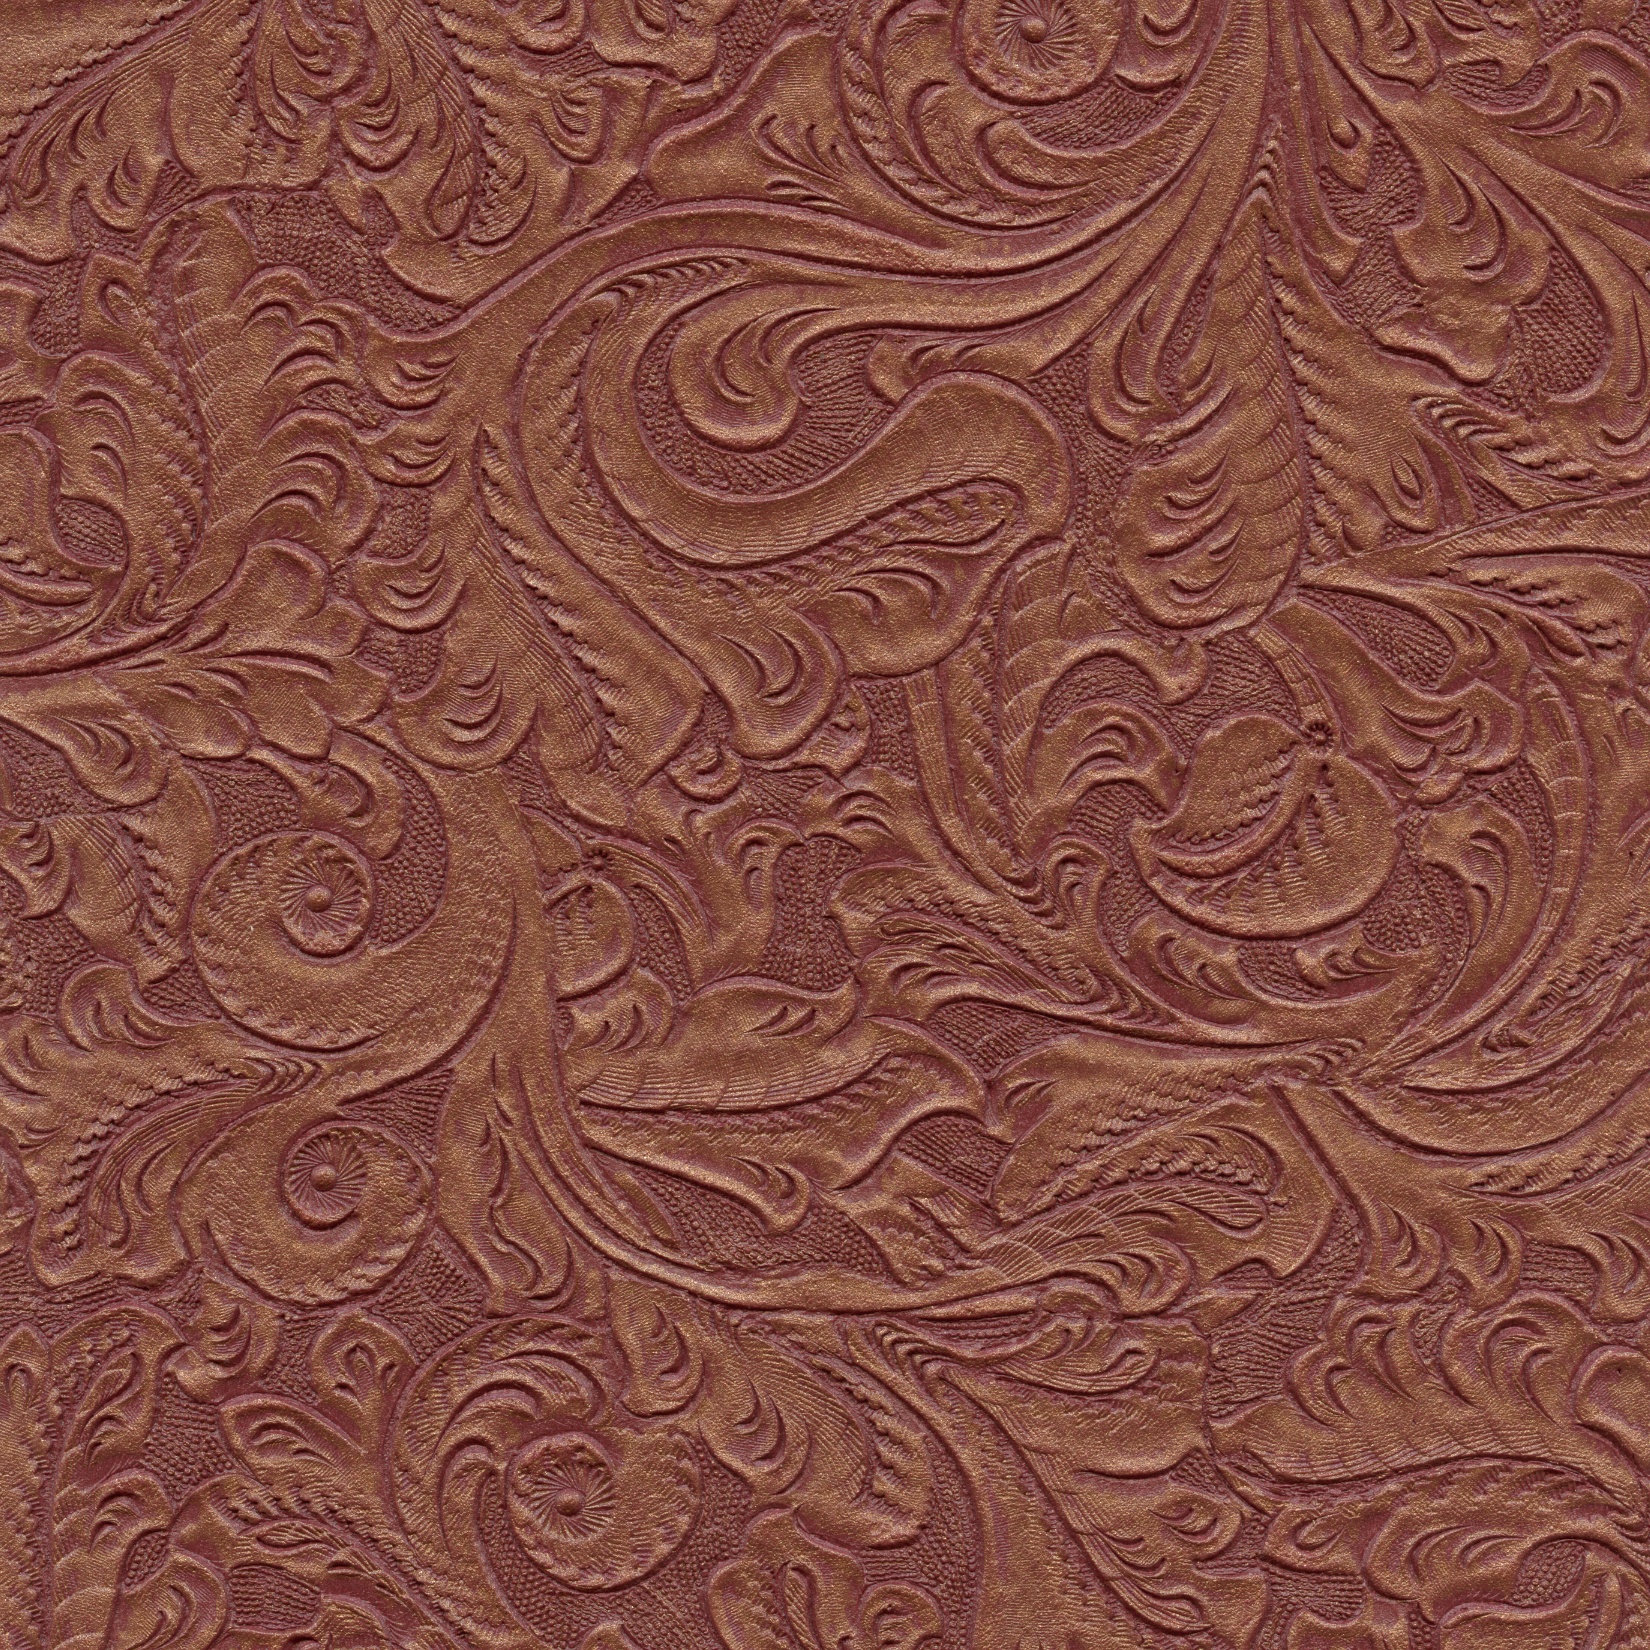 Tooled Leather Patterns Patterns in this style